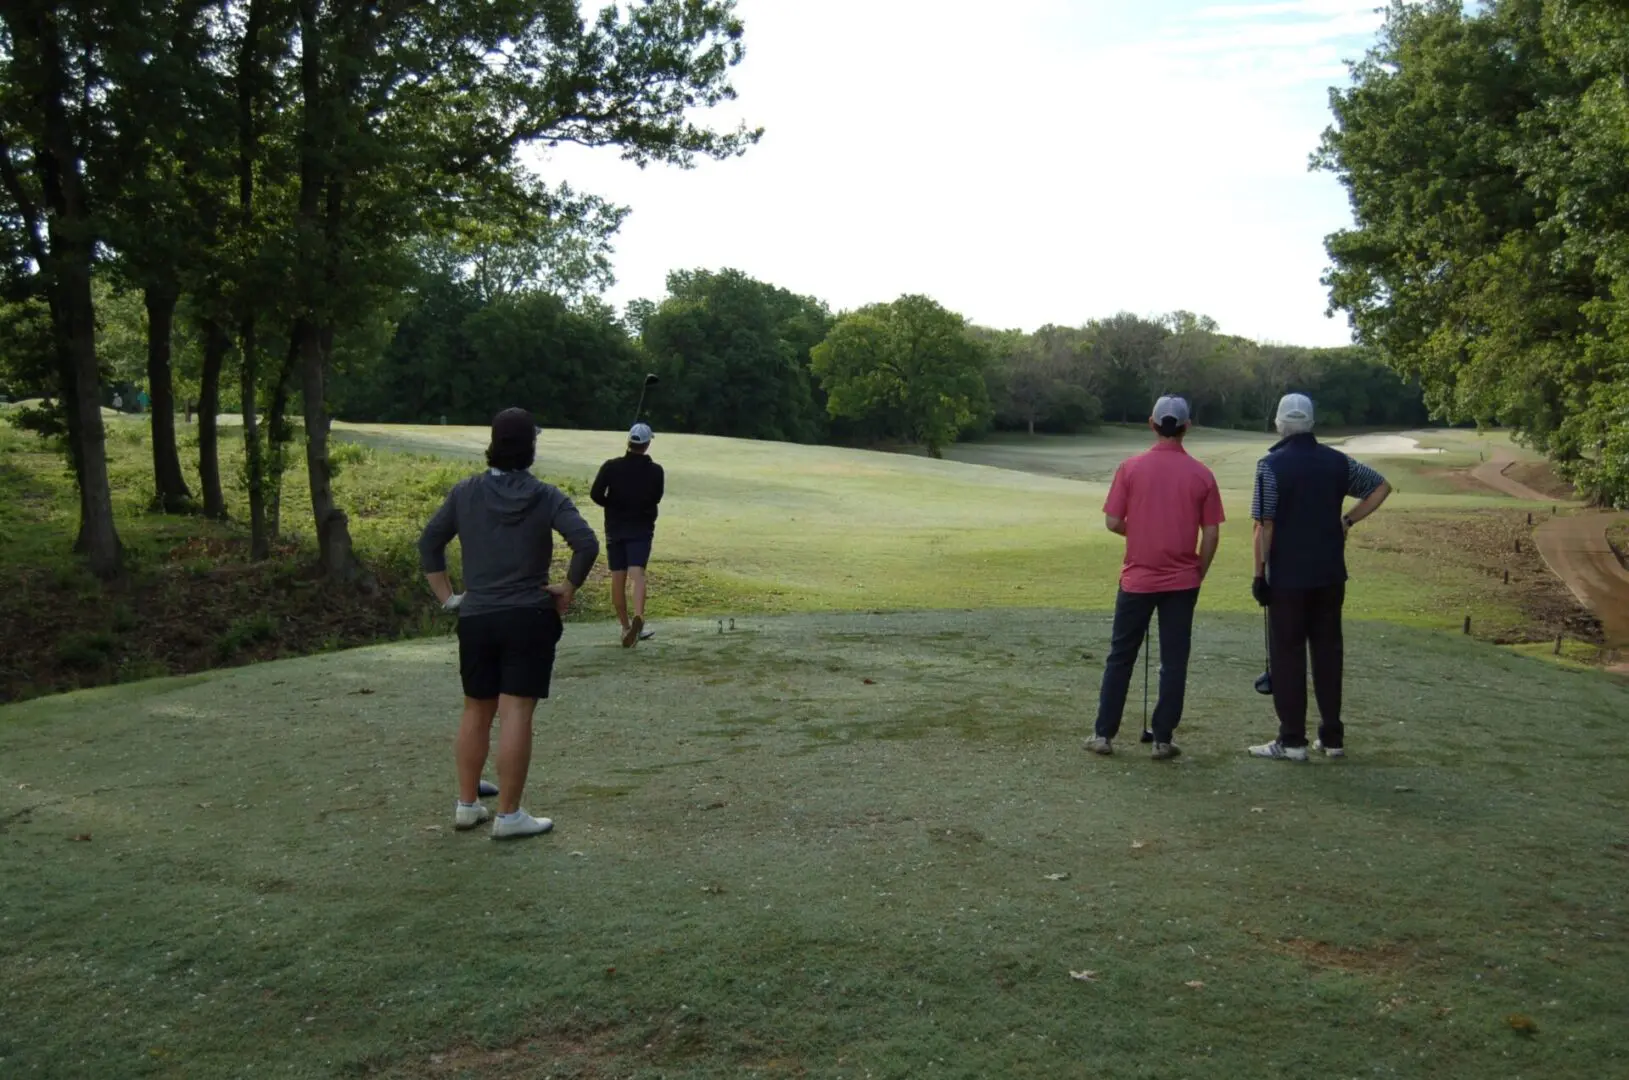 A group of people standing on a golf course.